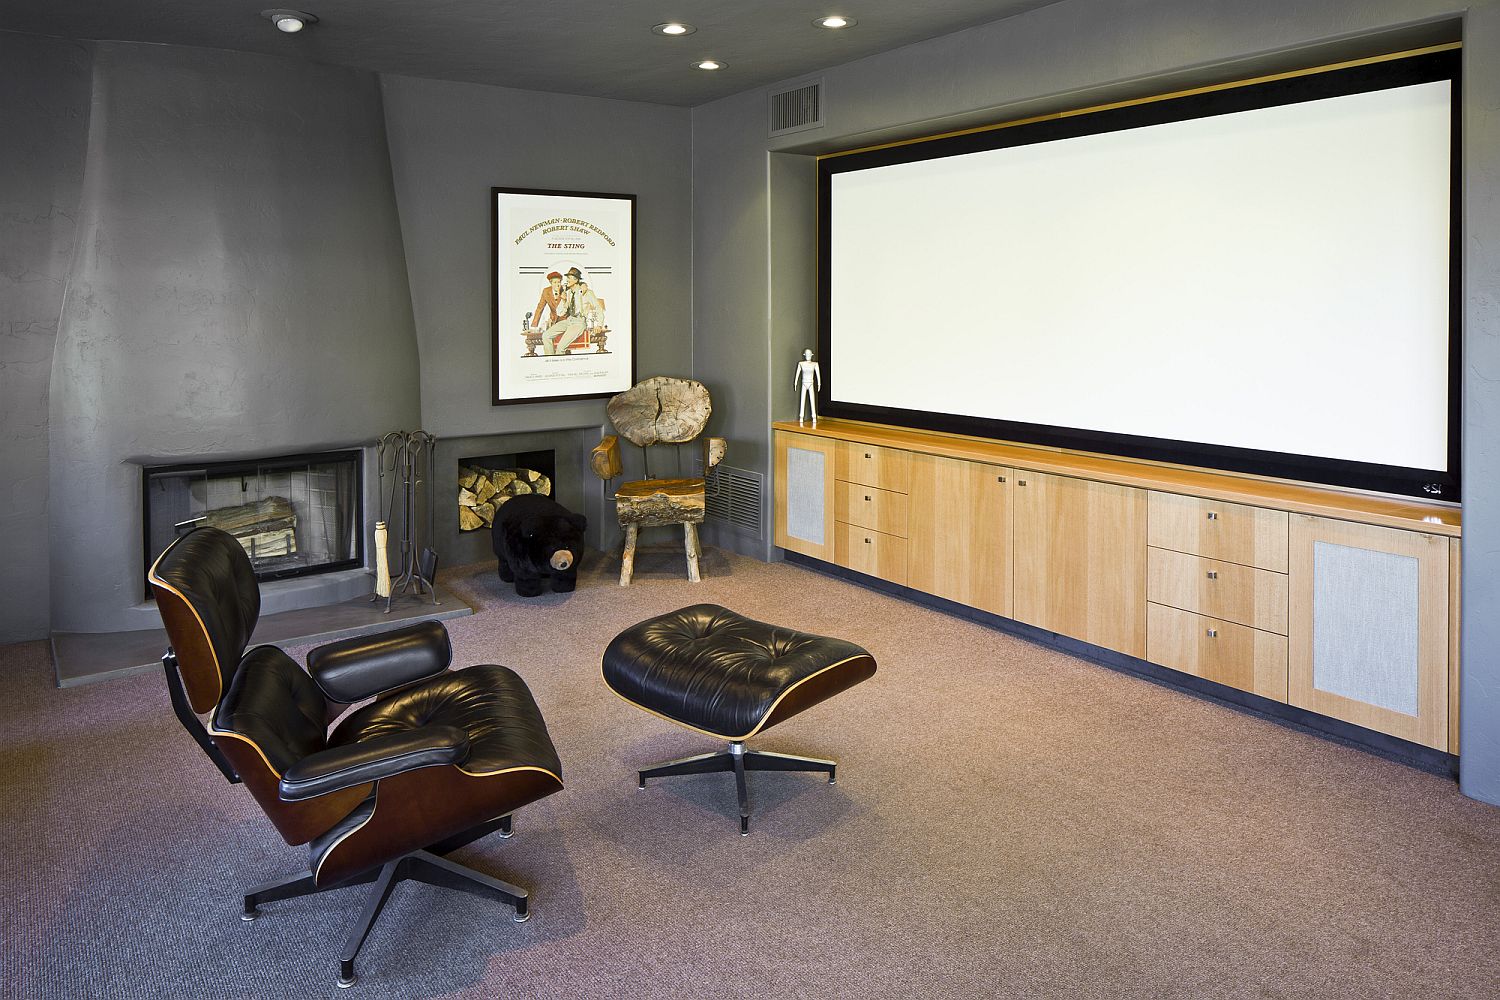 Media room with a fireplace and a relaxing lounger